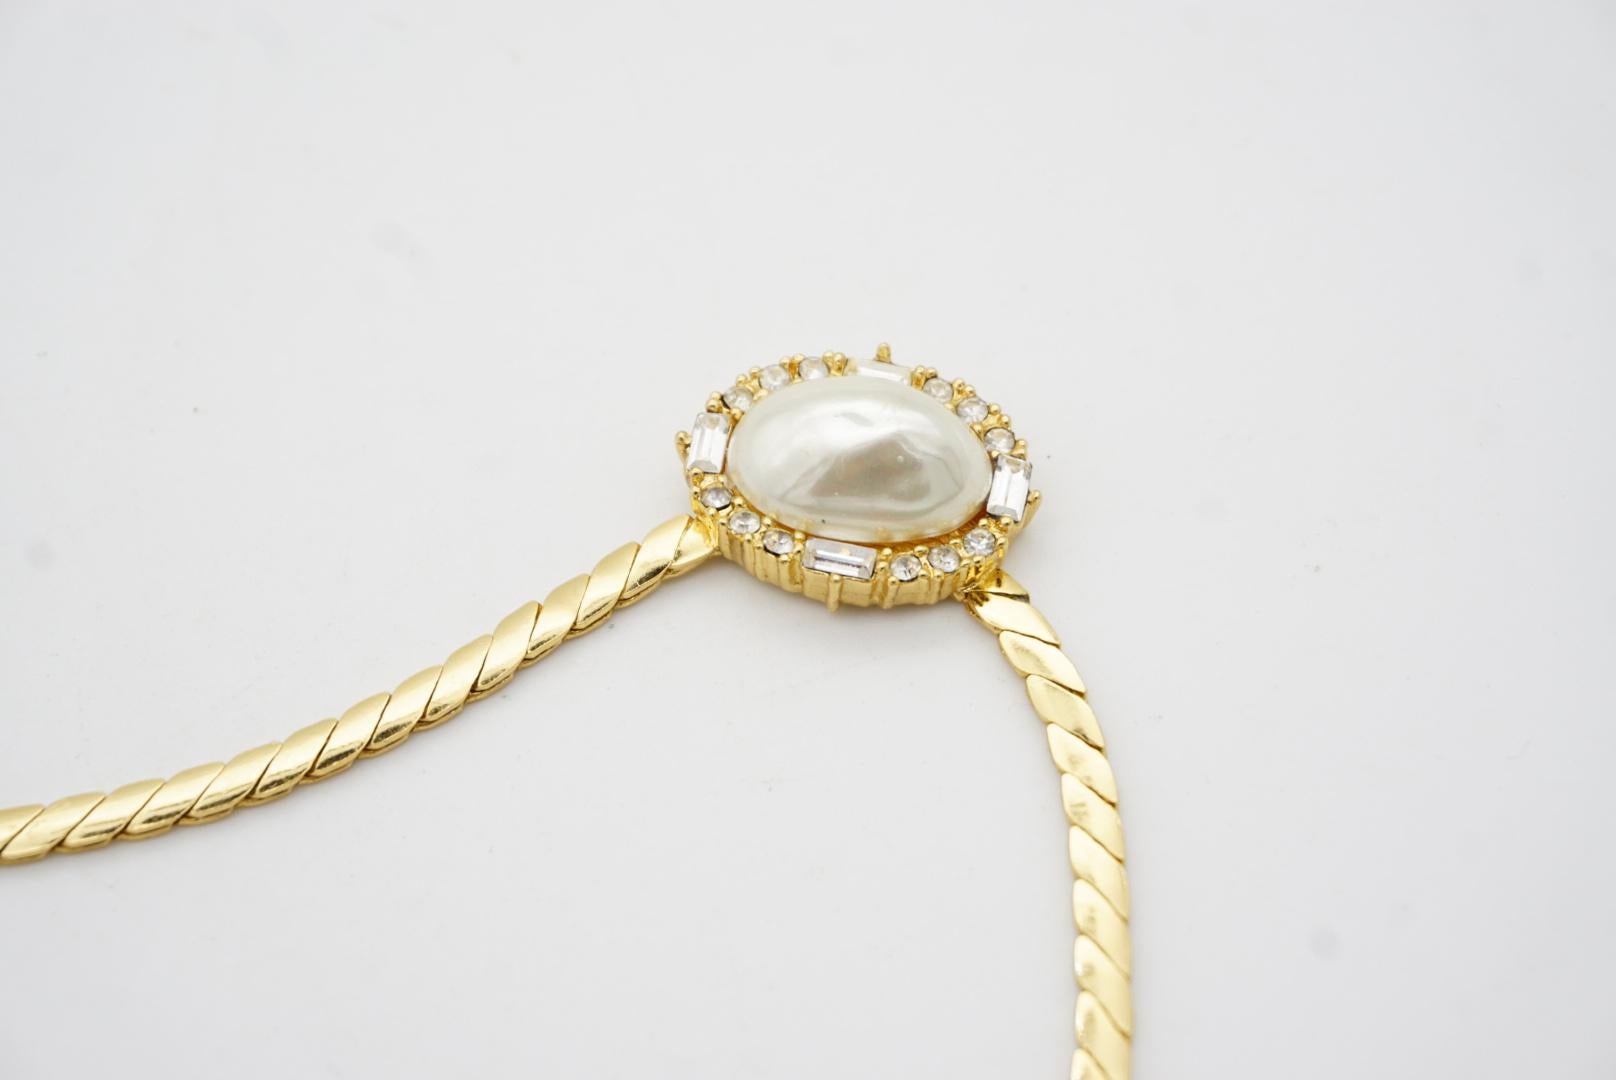 Christian Dior Vintage 1980s Large White Oval Pearl Crystals Pendant Necklace For Sale 2